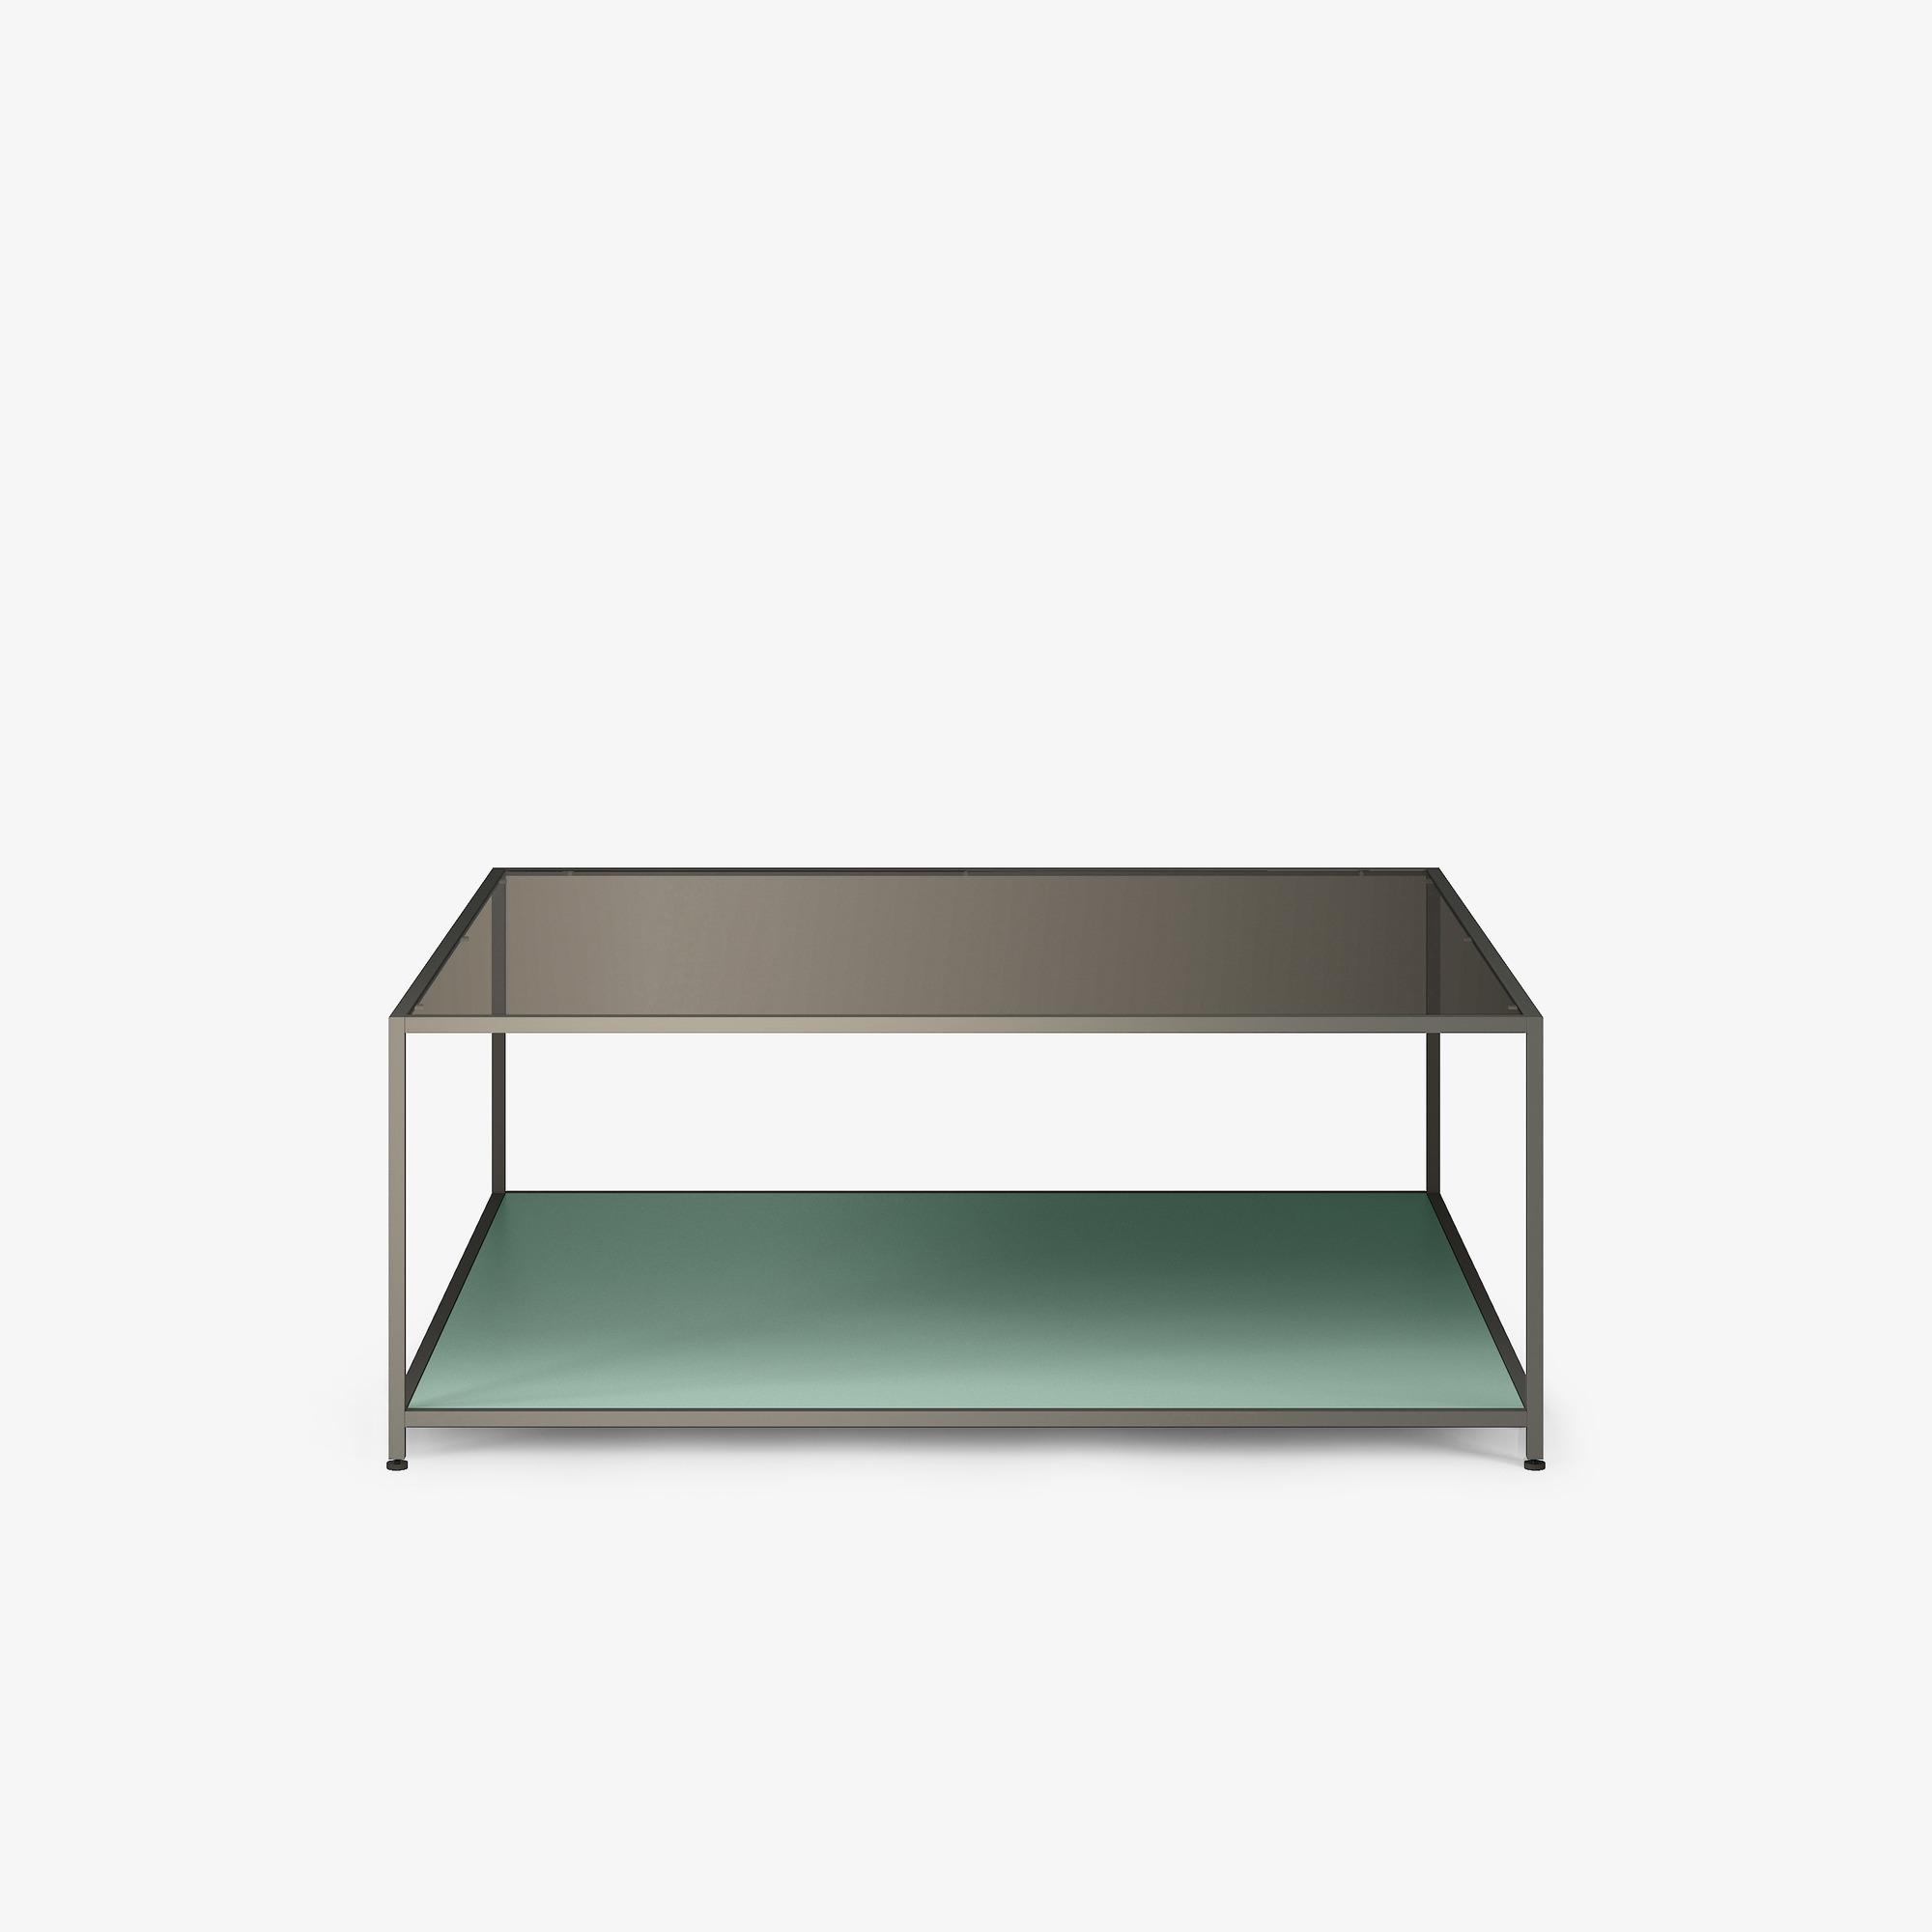 Image Square low table 6